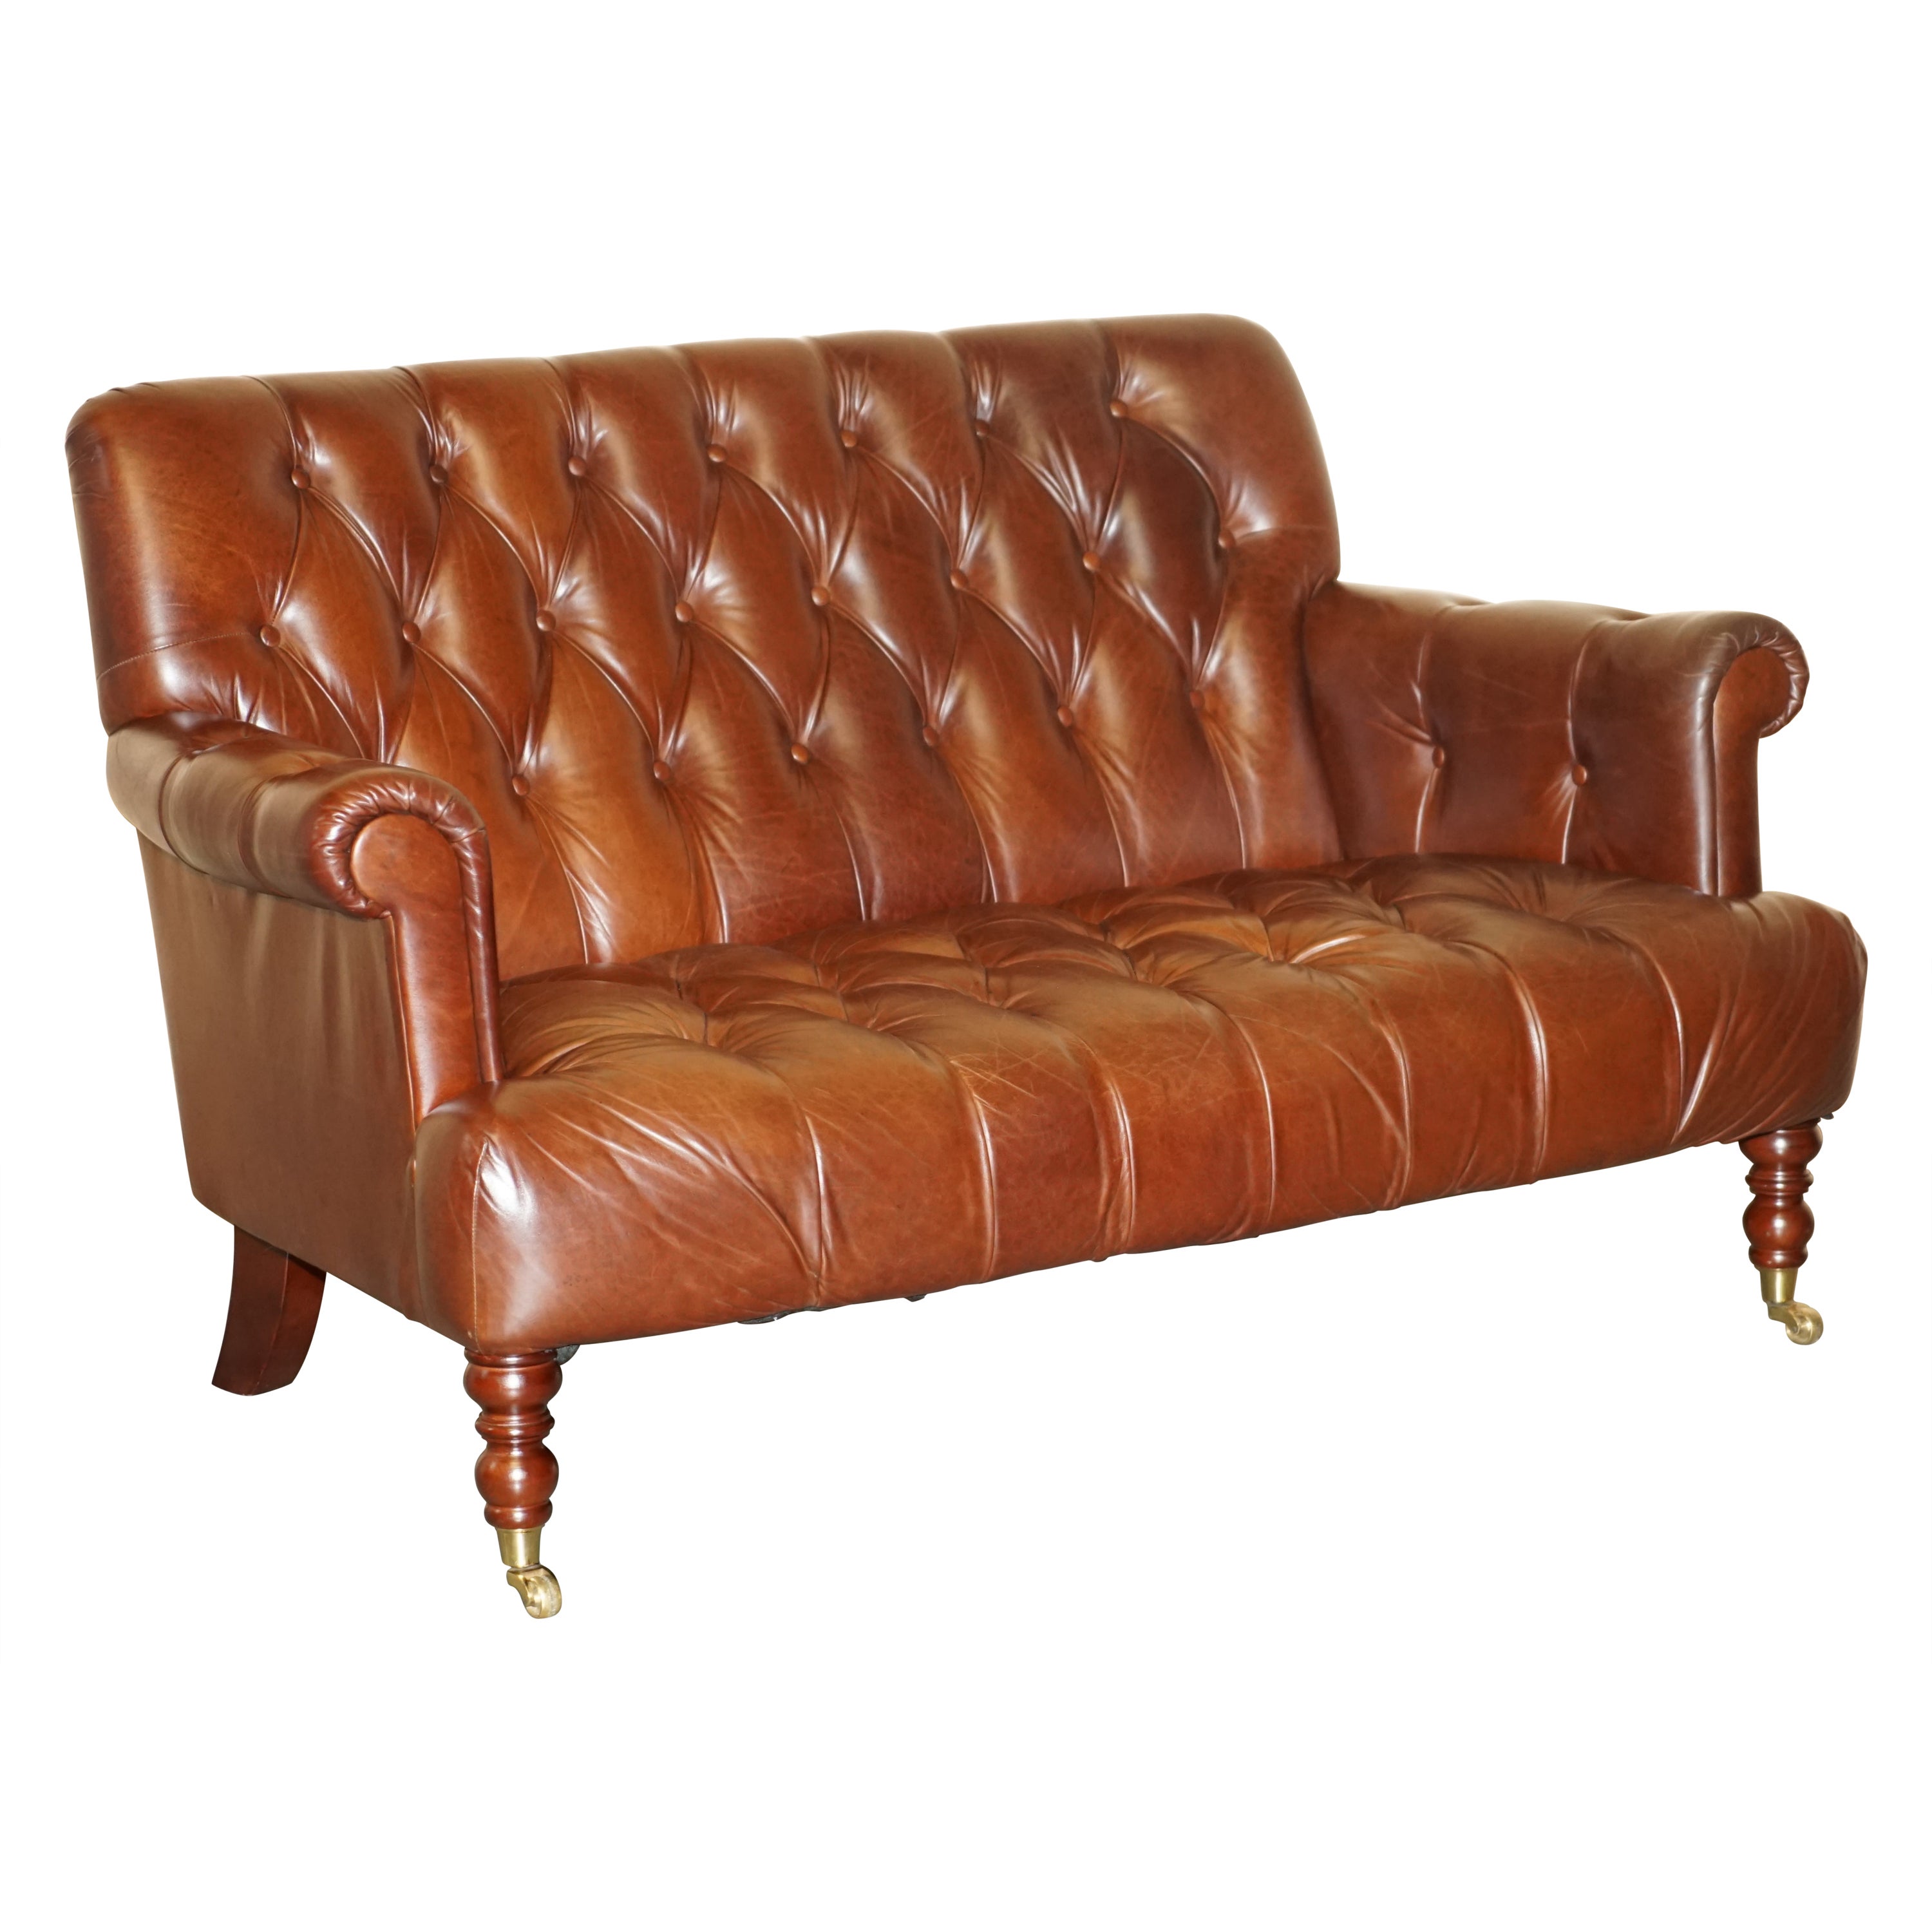 FiNE CHESTNUT BROWN LEATHER LAUREN ASHLEY CHESTERFIELD TWO SEAT LIBRARY SOFa im Angebot